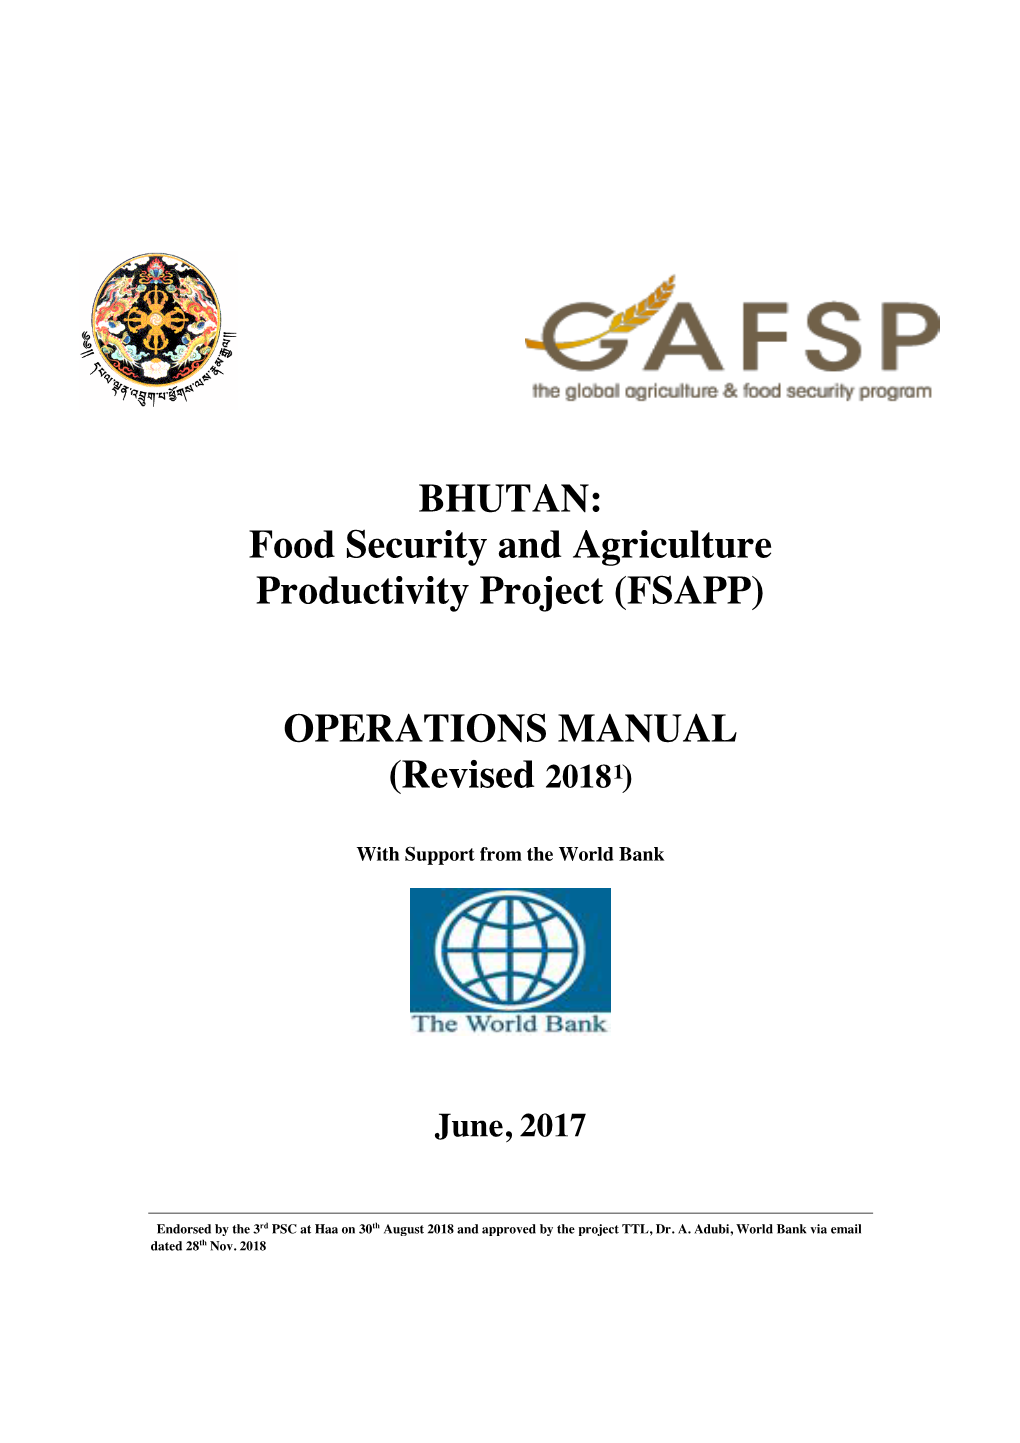 Food Security and Agriculture Productivity Project (FSAPP)